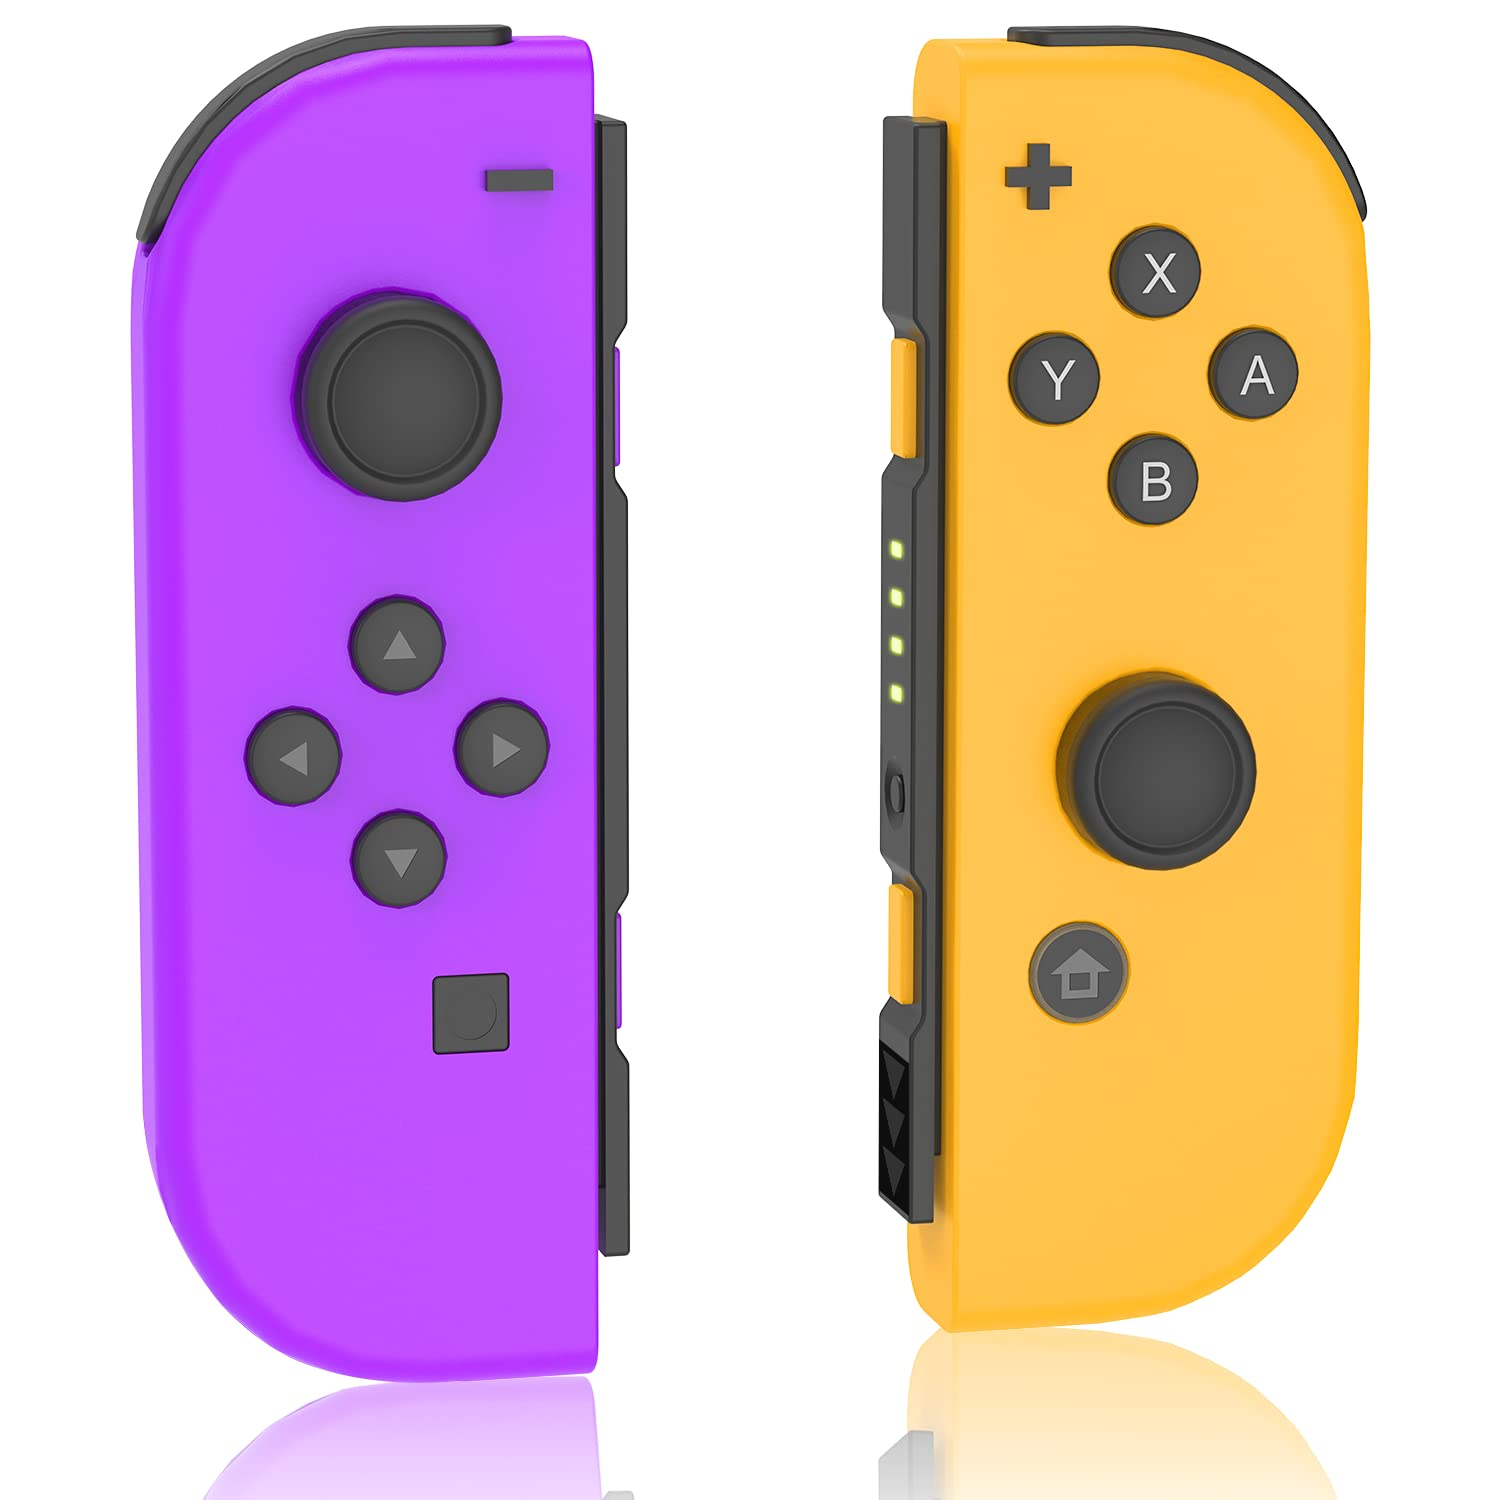 YU33 Joypad for Nintendo Switch Controller, Left Right Wireless Joypad Controllers Compatible With Switch/Switch OLED, Orange/Purple Joy-Pad for Switch Motion Control/Wake-up/Screenshot(No NFC)